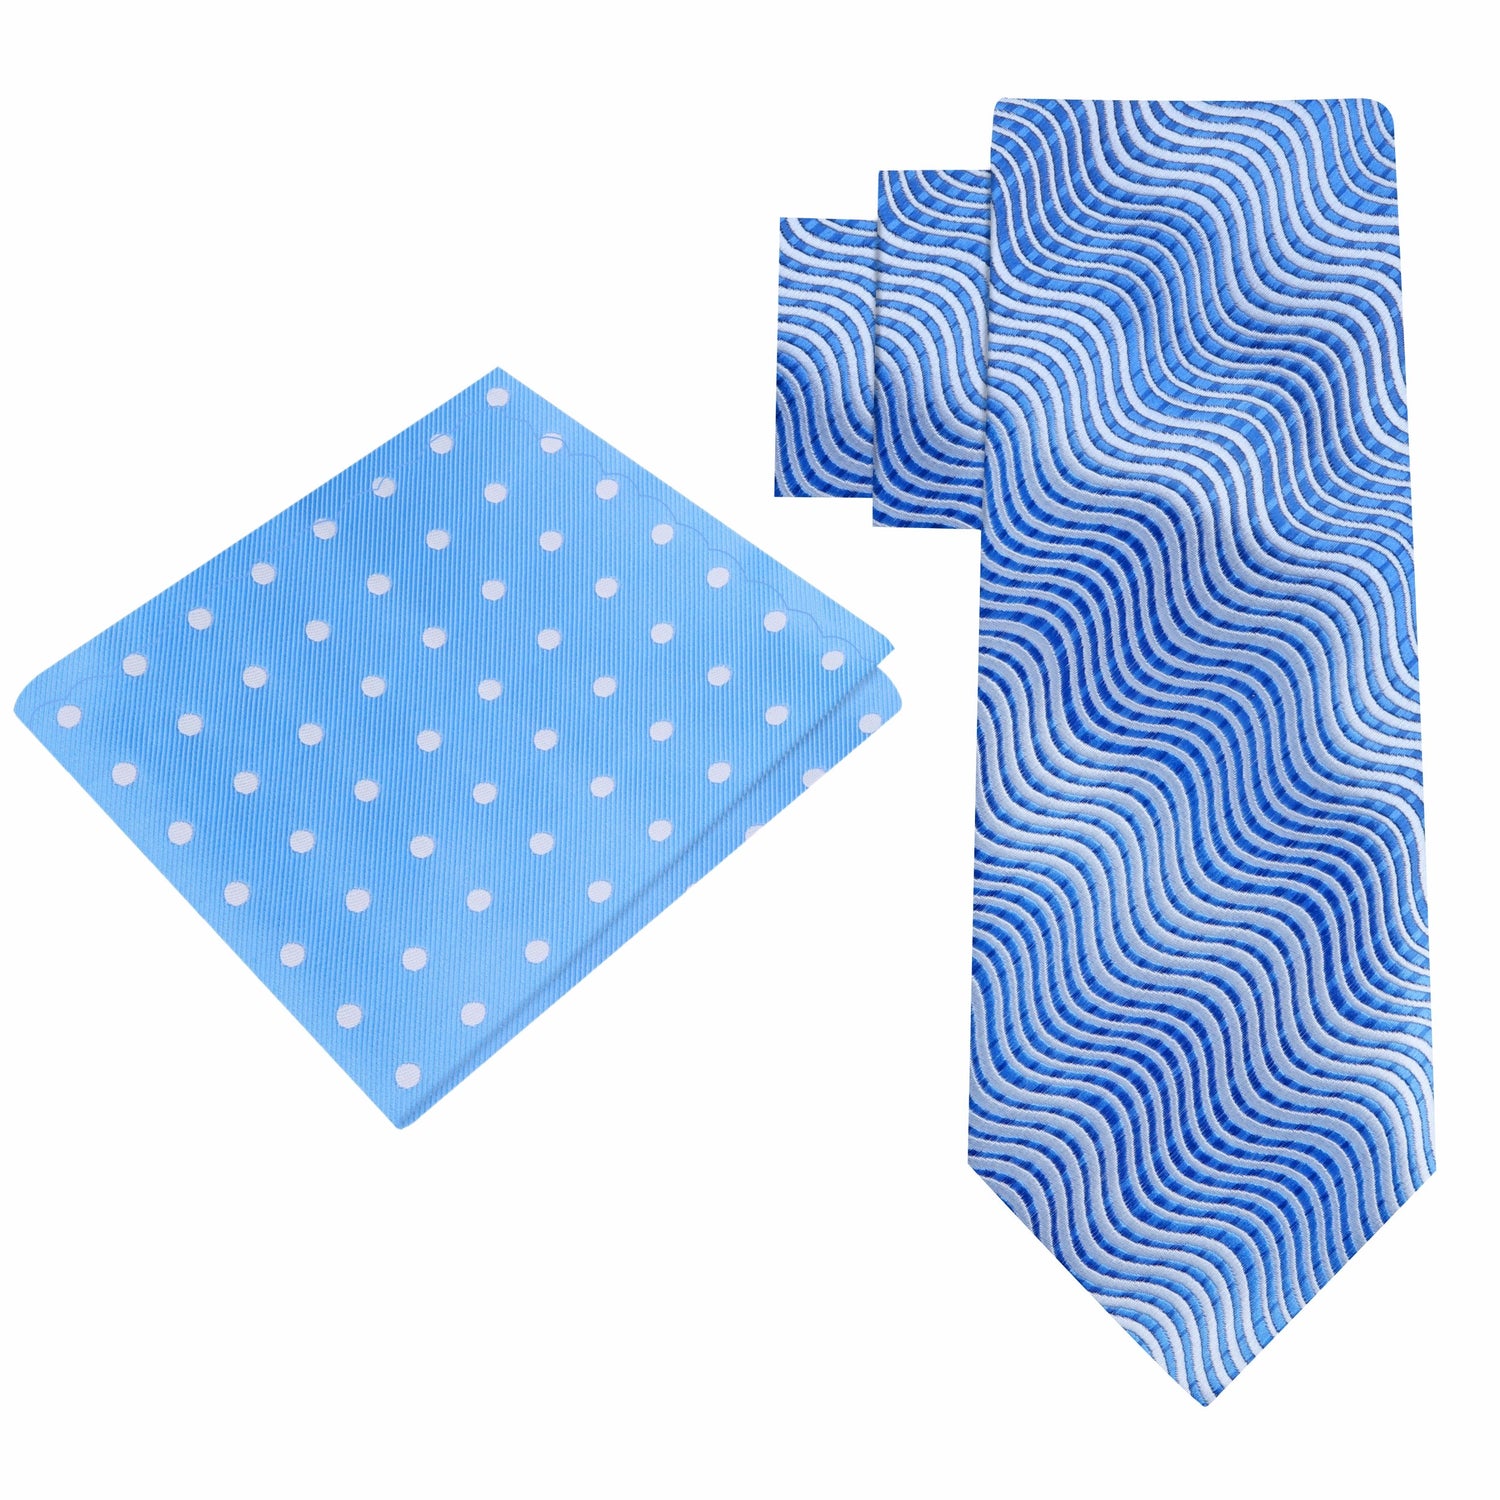 Alt View: Shades of Blue Wavy Lines Necktie with Light Blue, White Polka Pocket Square